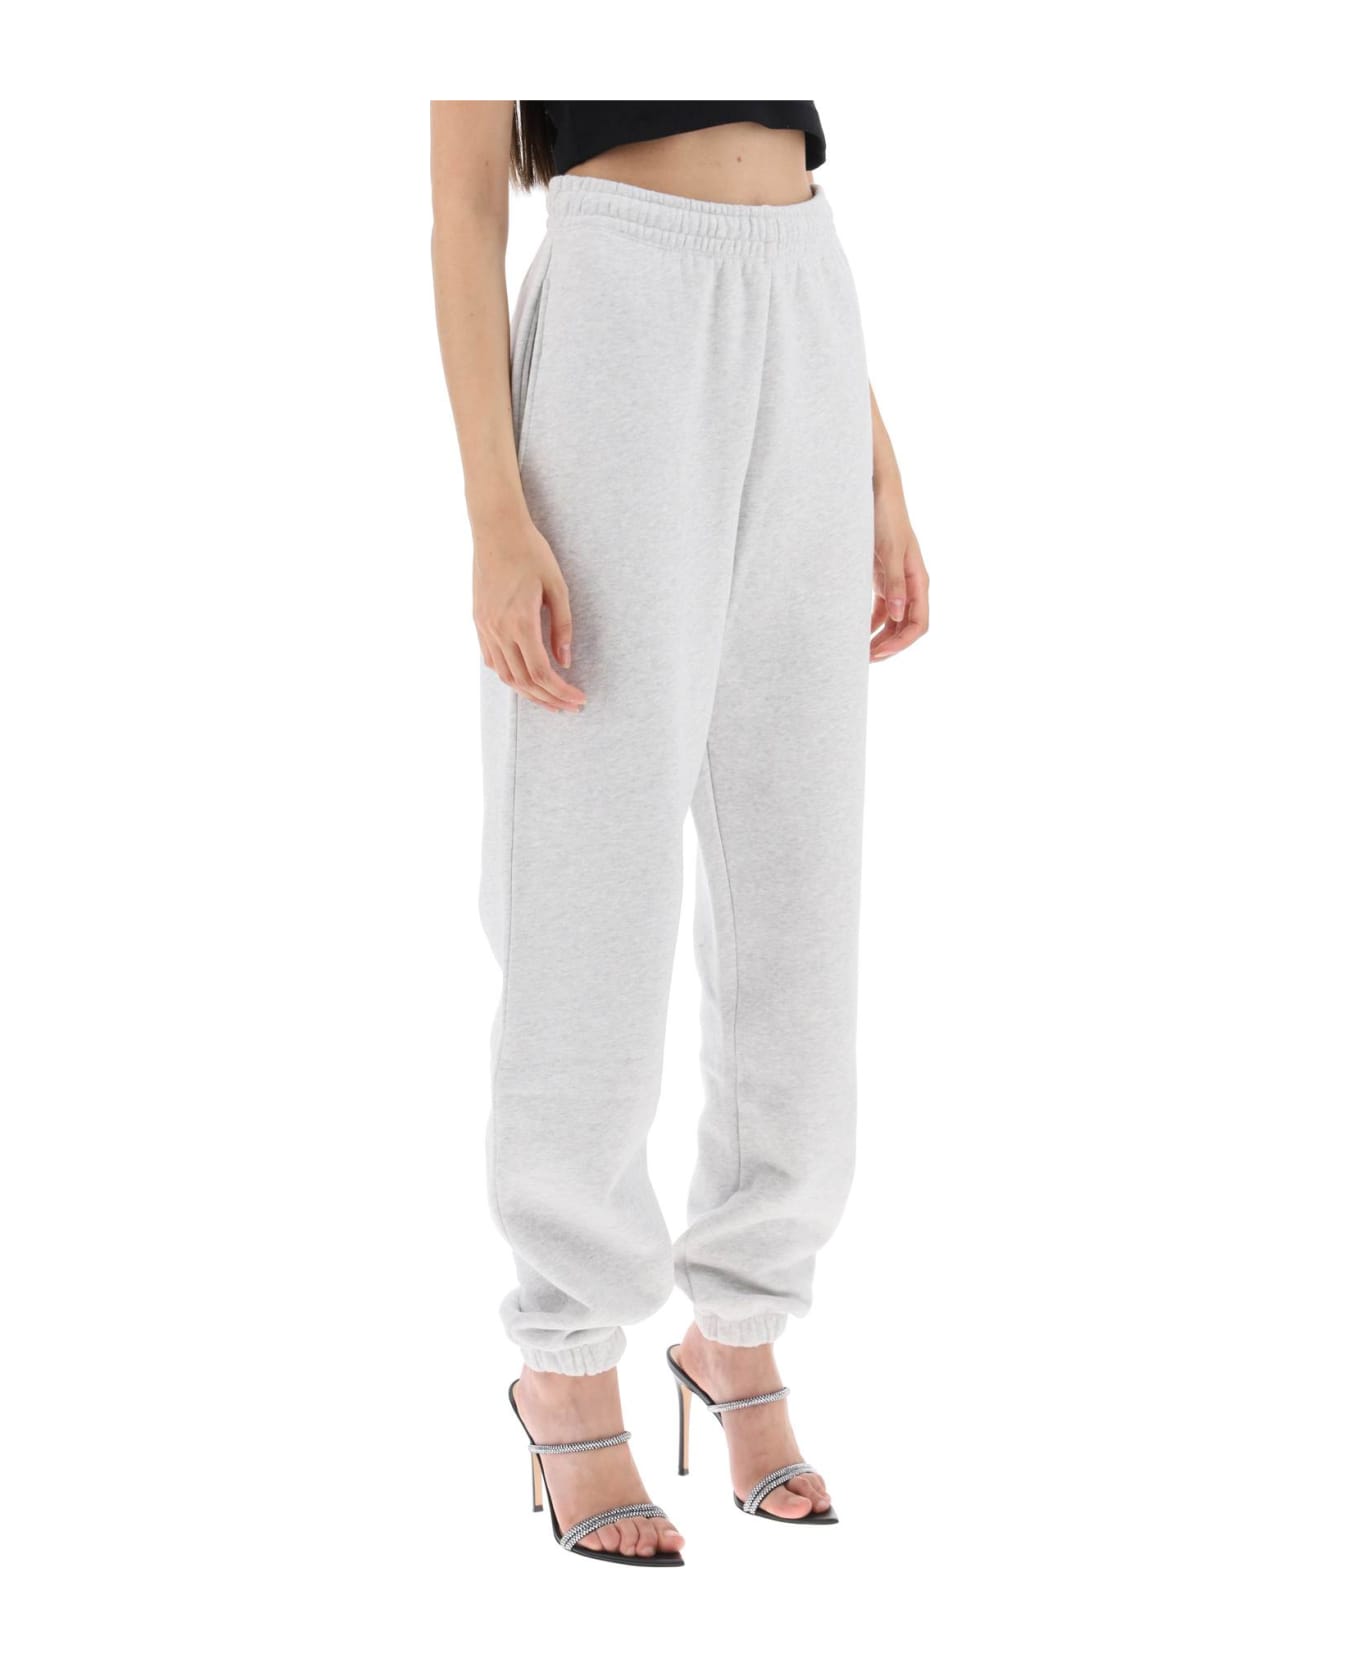 Rotate by Birger Christensen Joggers With Embroidered Logo - LIGHT GREY MELANGE (Grey)